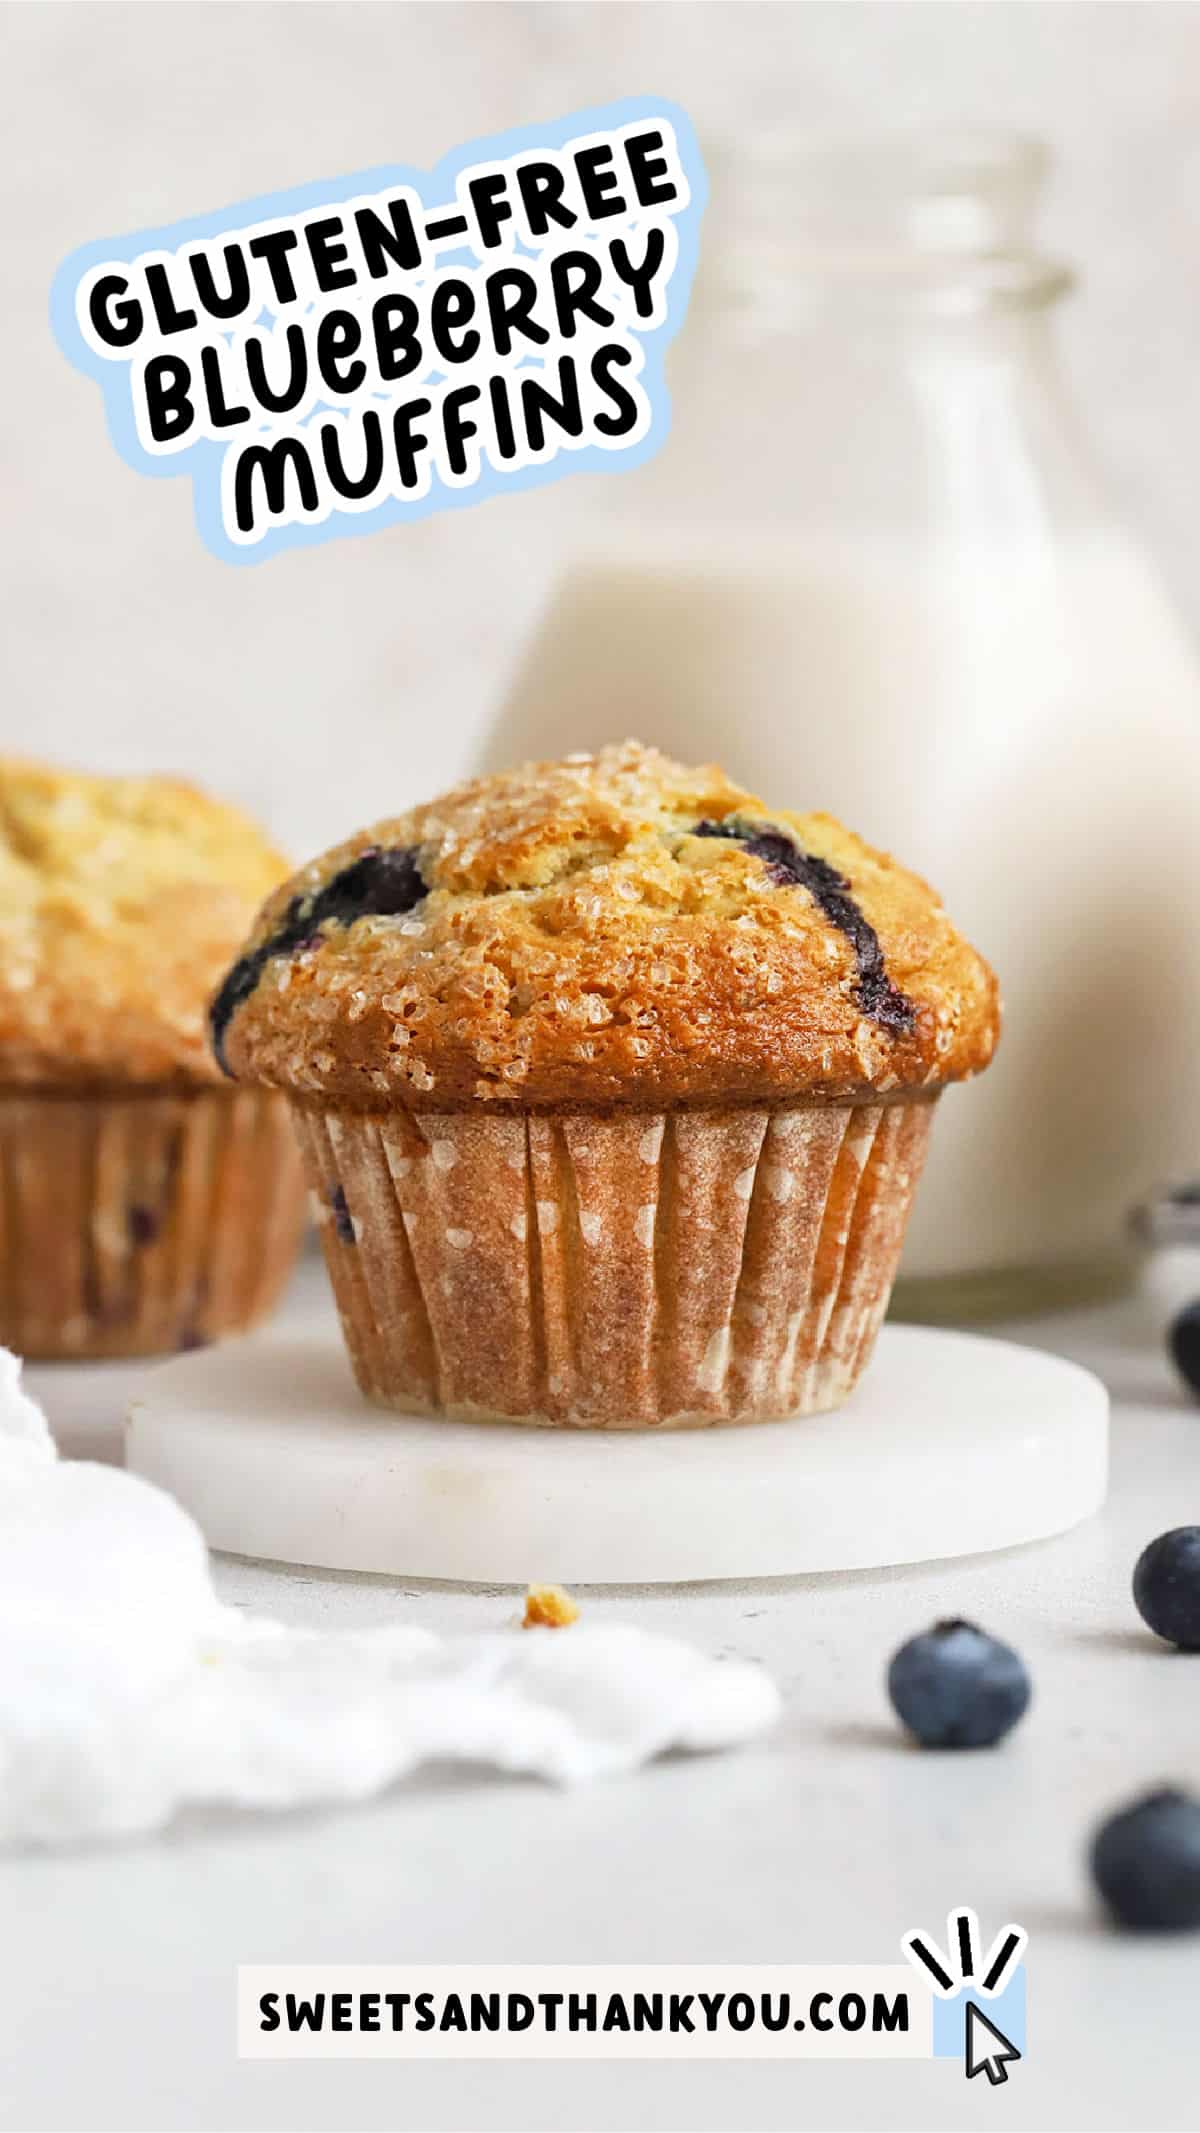 If you've been looking for the best gluten-free blueberry muffin recipe, your search stops here! These bakery-style gluten-free blueberry muffins are light, fluffy, and packed with fresh blueberry flavor. Made from scratch with simple ingredients, they're perfect for a special breakfast or gluten-free brunch! 